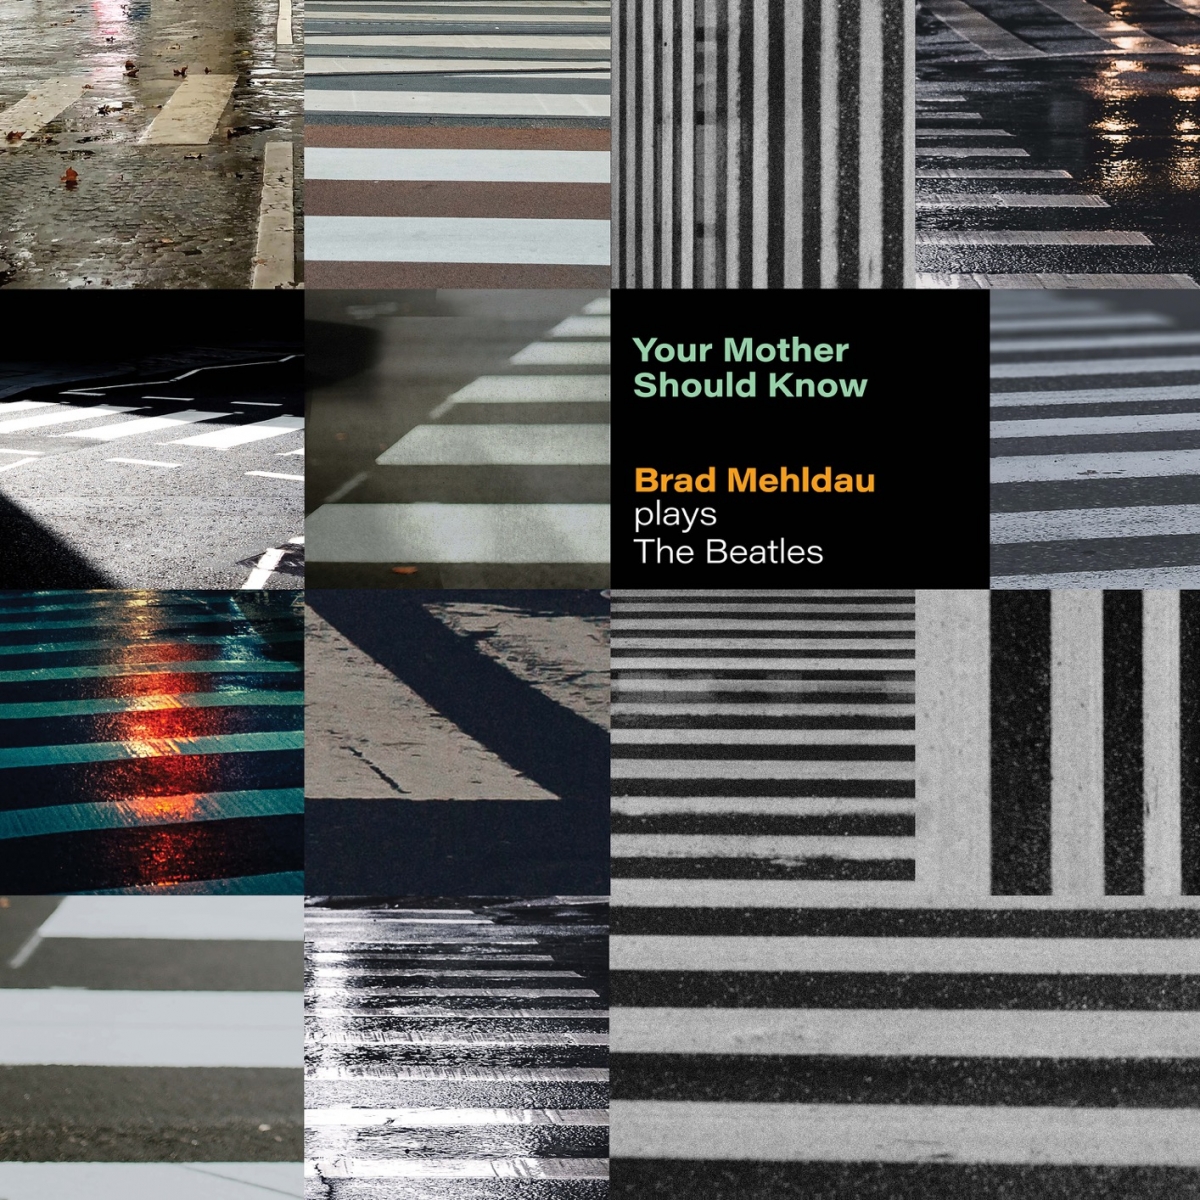 Brad Mehldau plays The Beatles  Your Mother Should Know